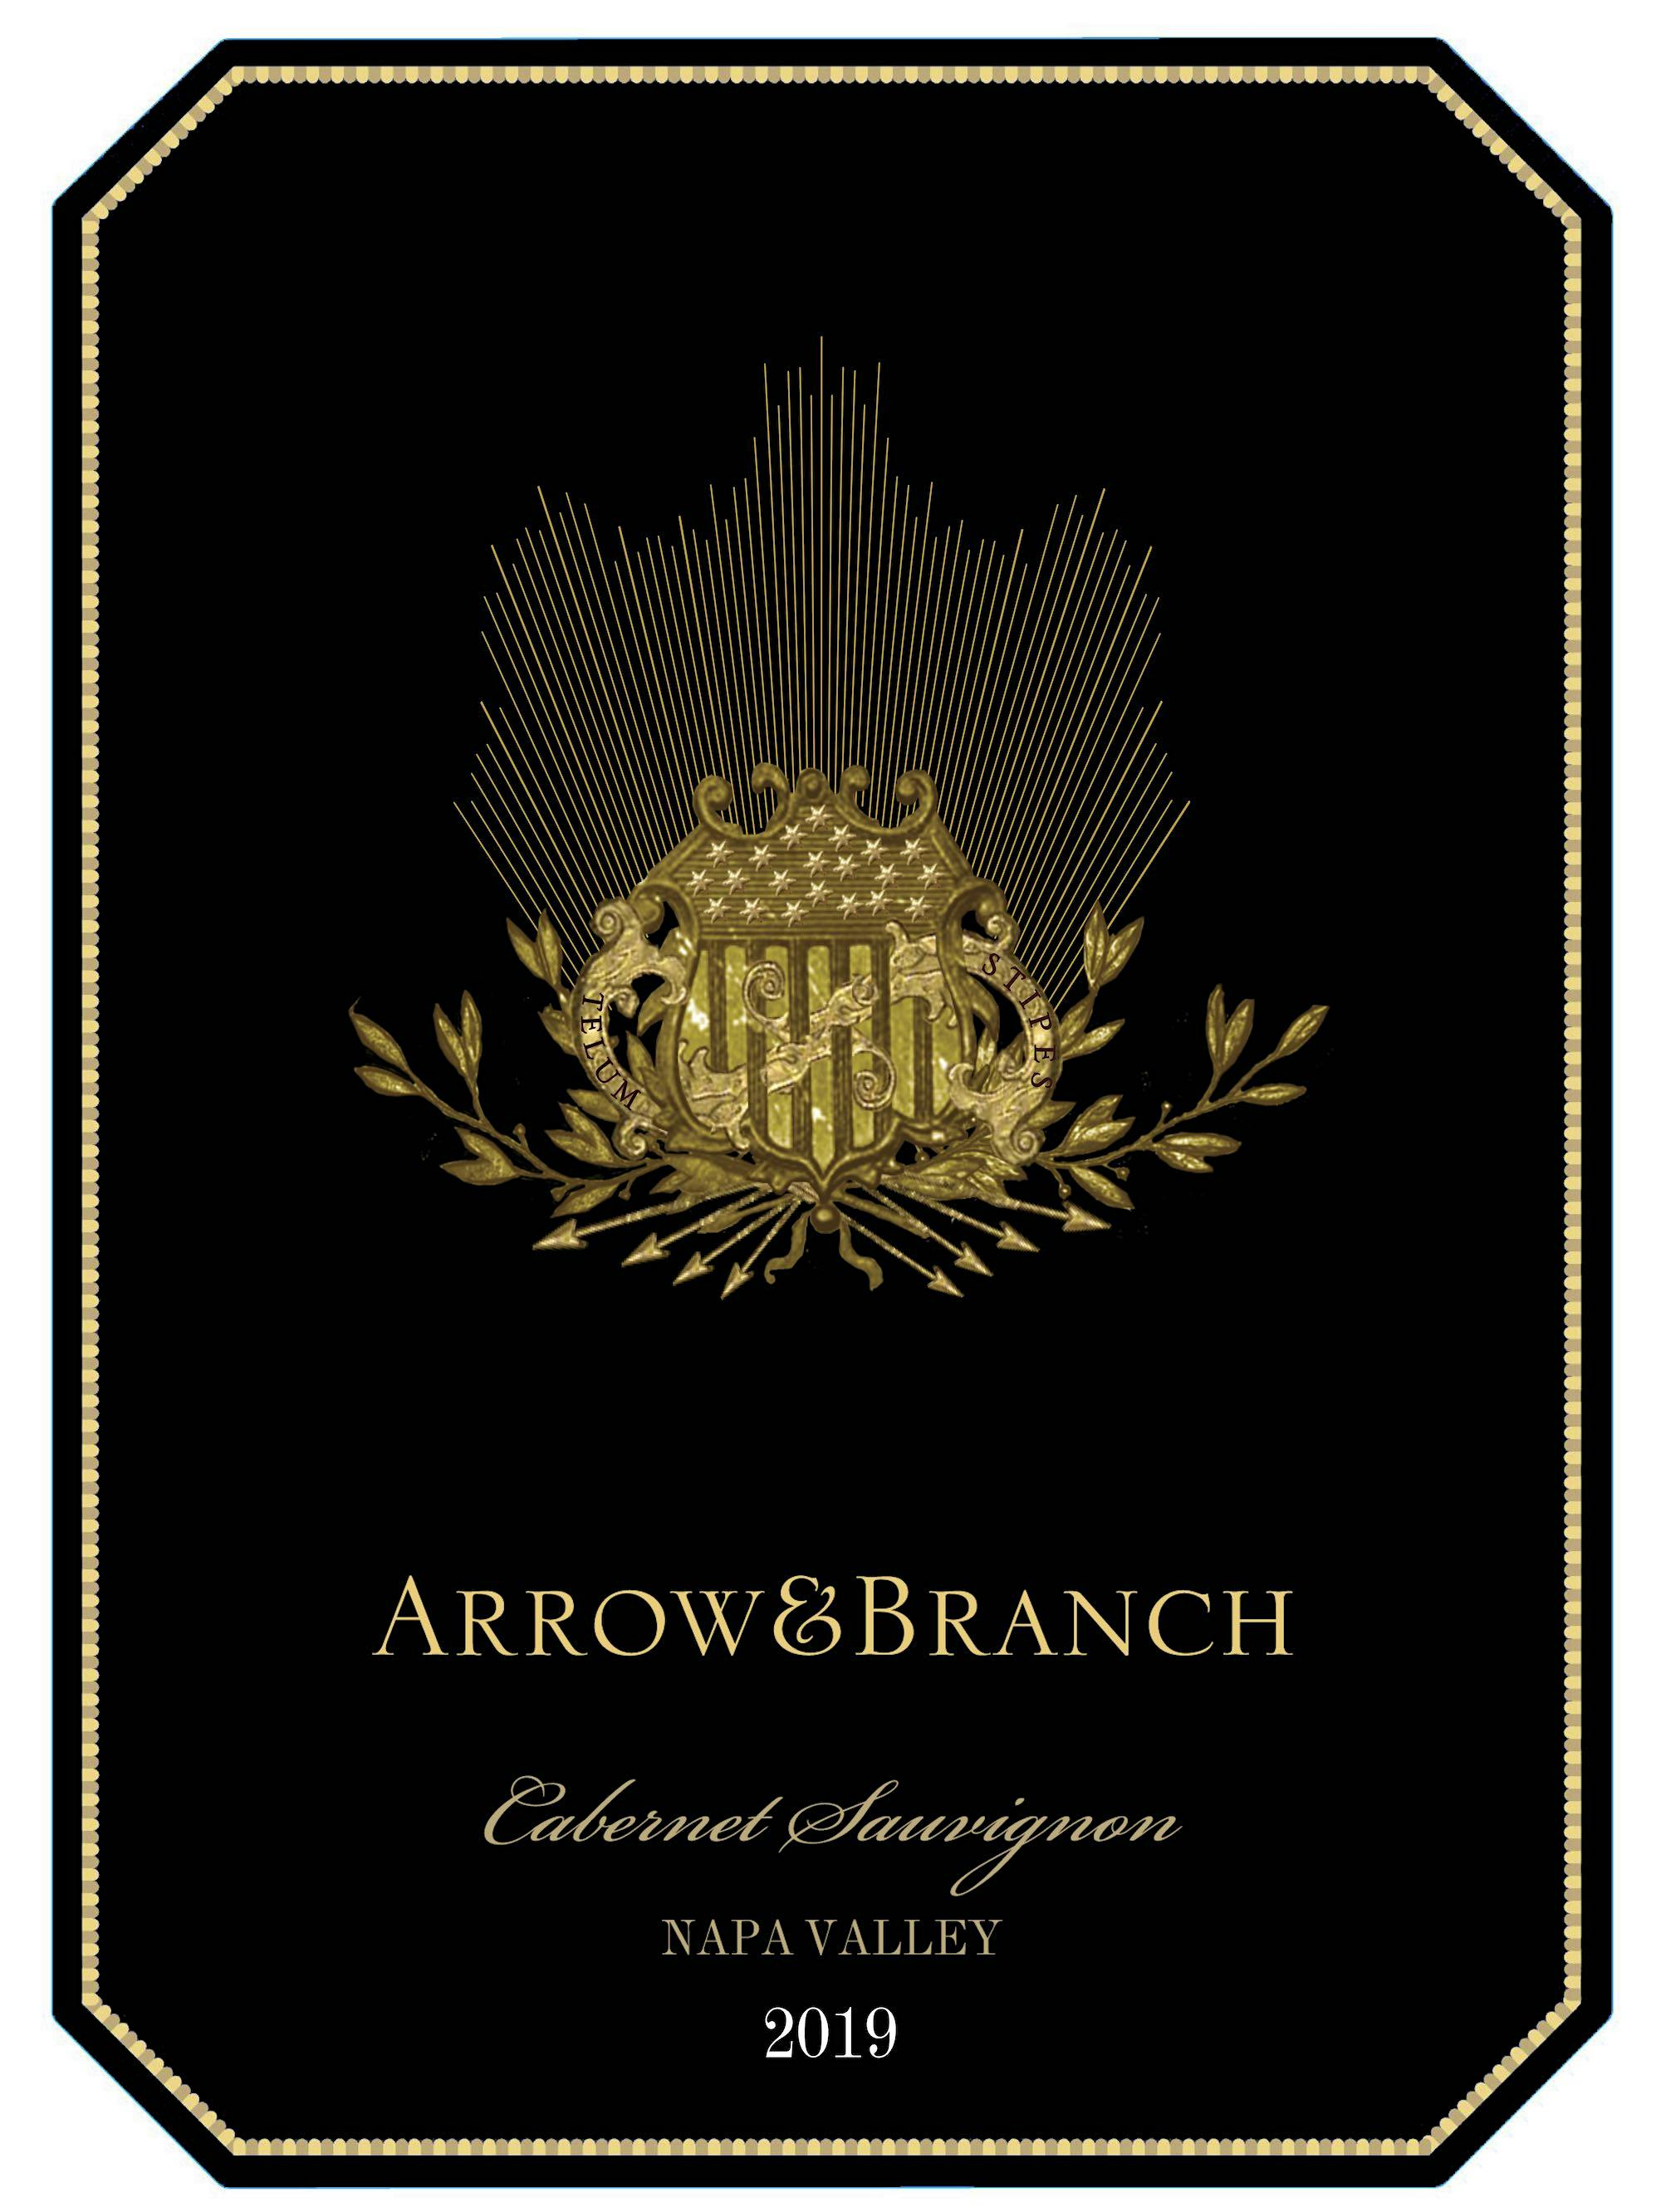 Label for Arrow & Branch